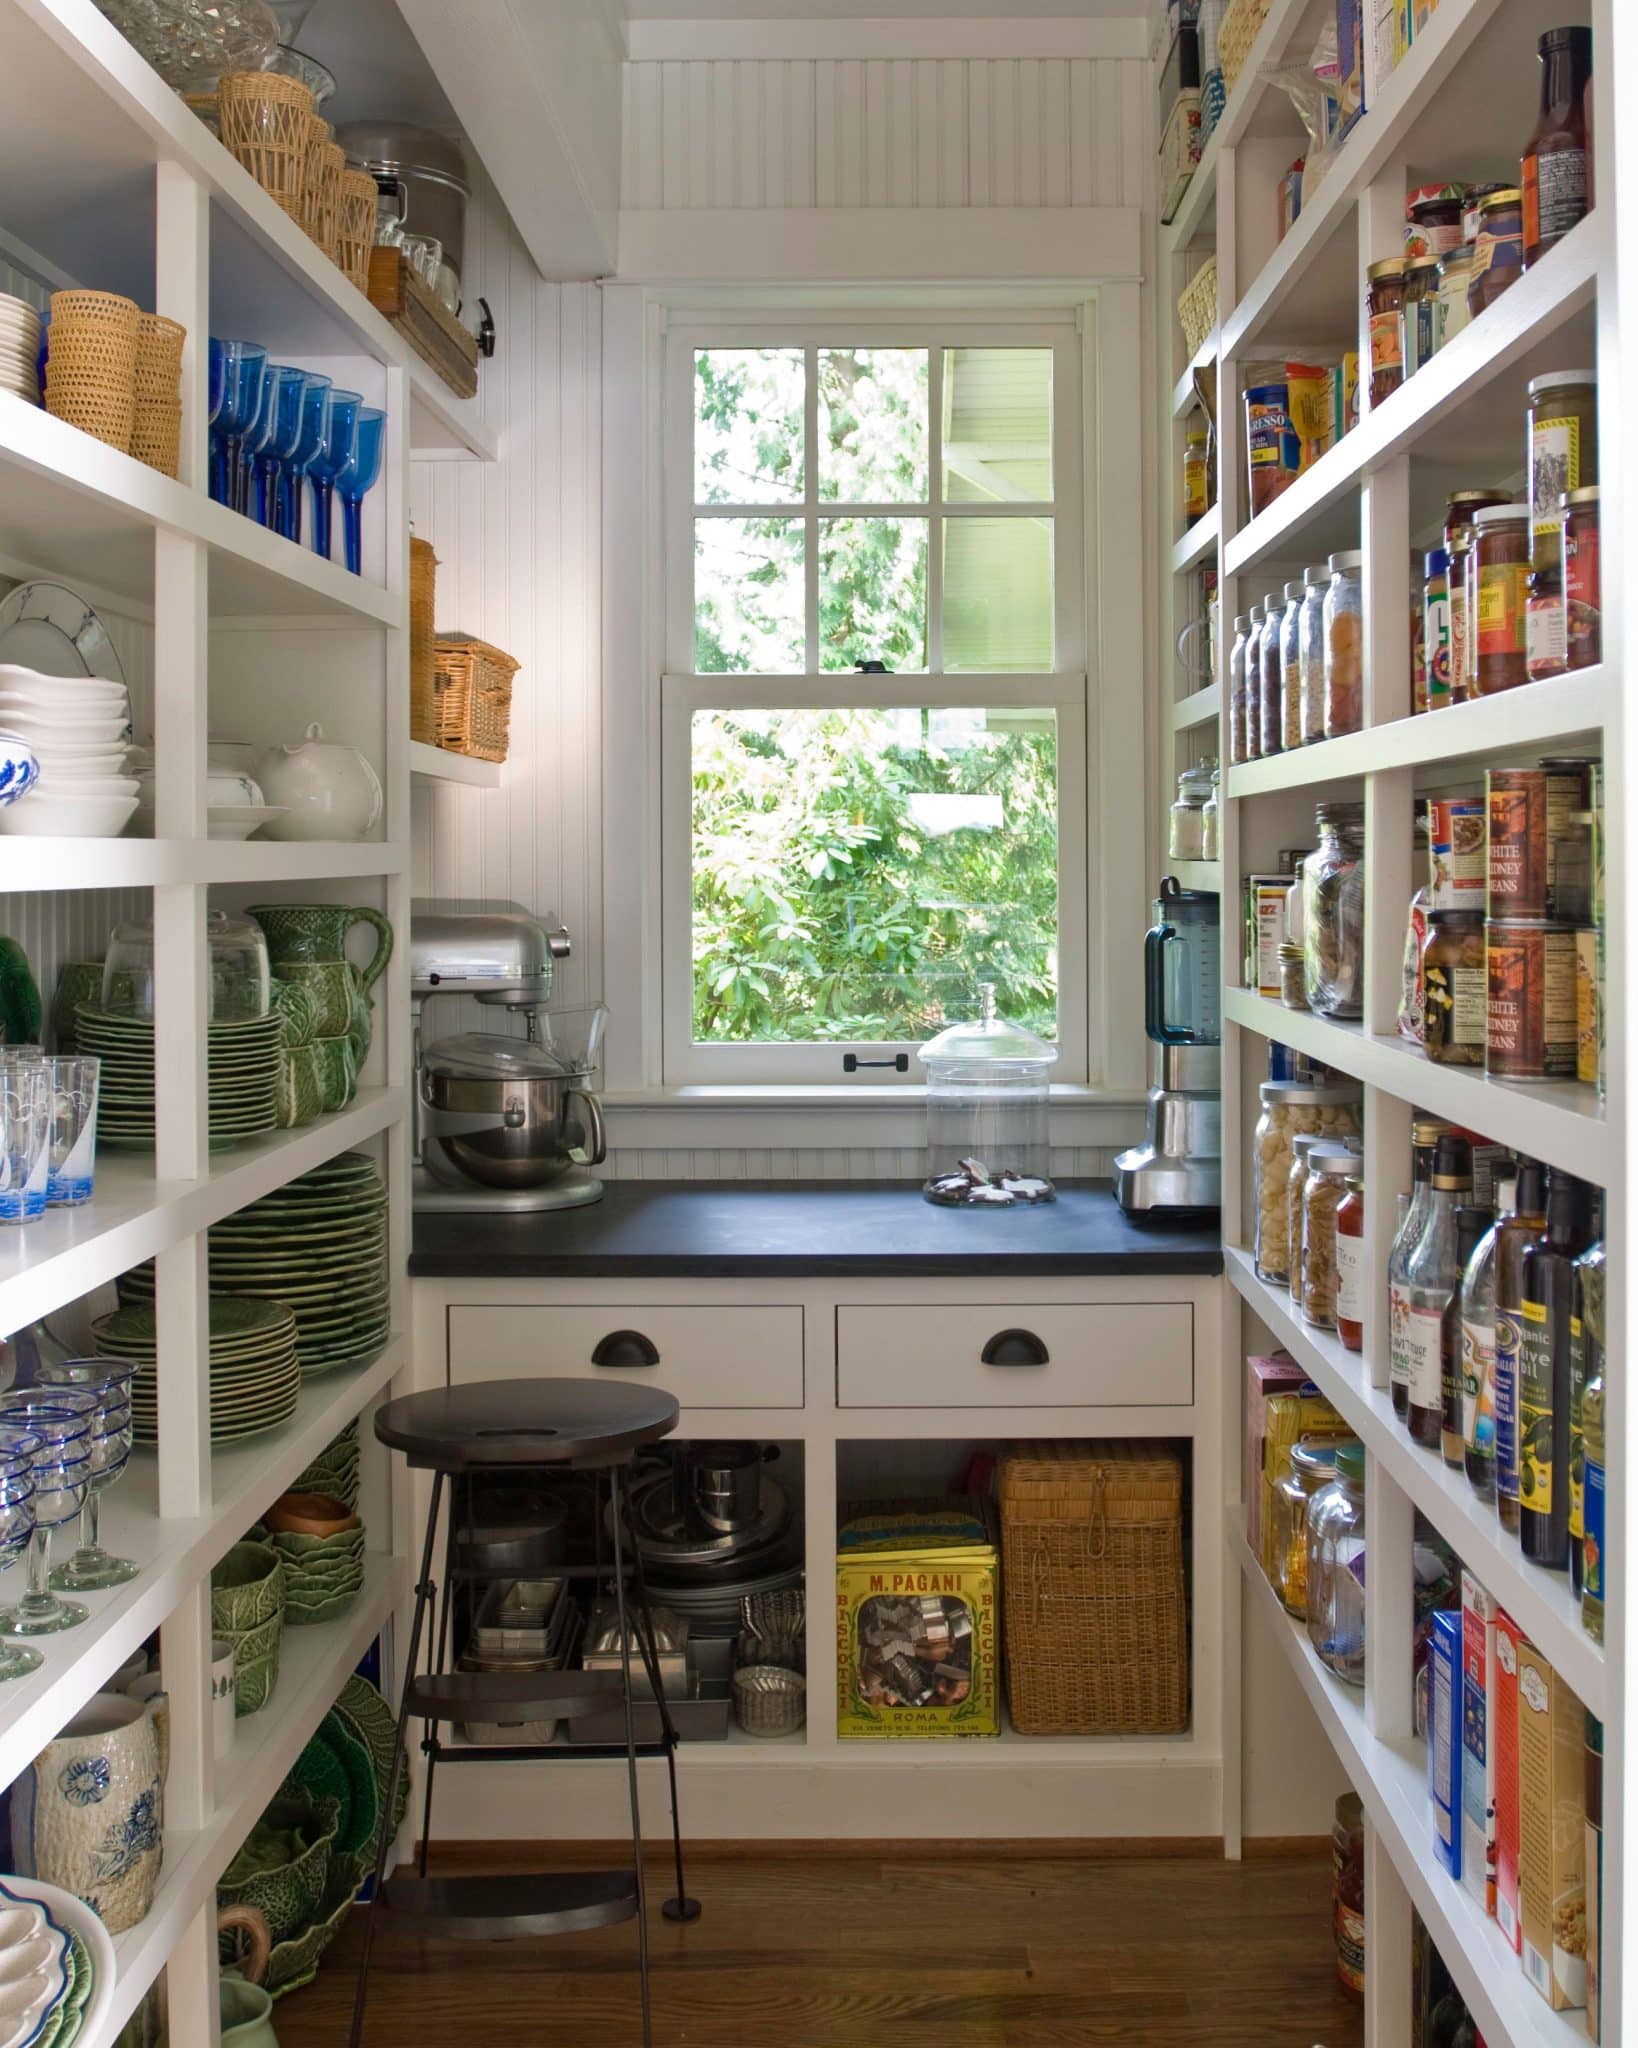 How to Maximize Storage Space in Butler’s Pantry Cabinets?